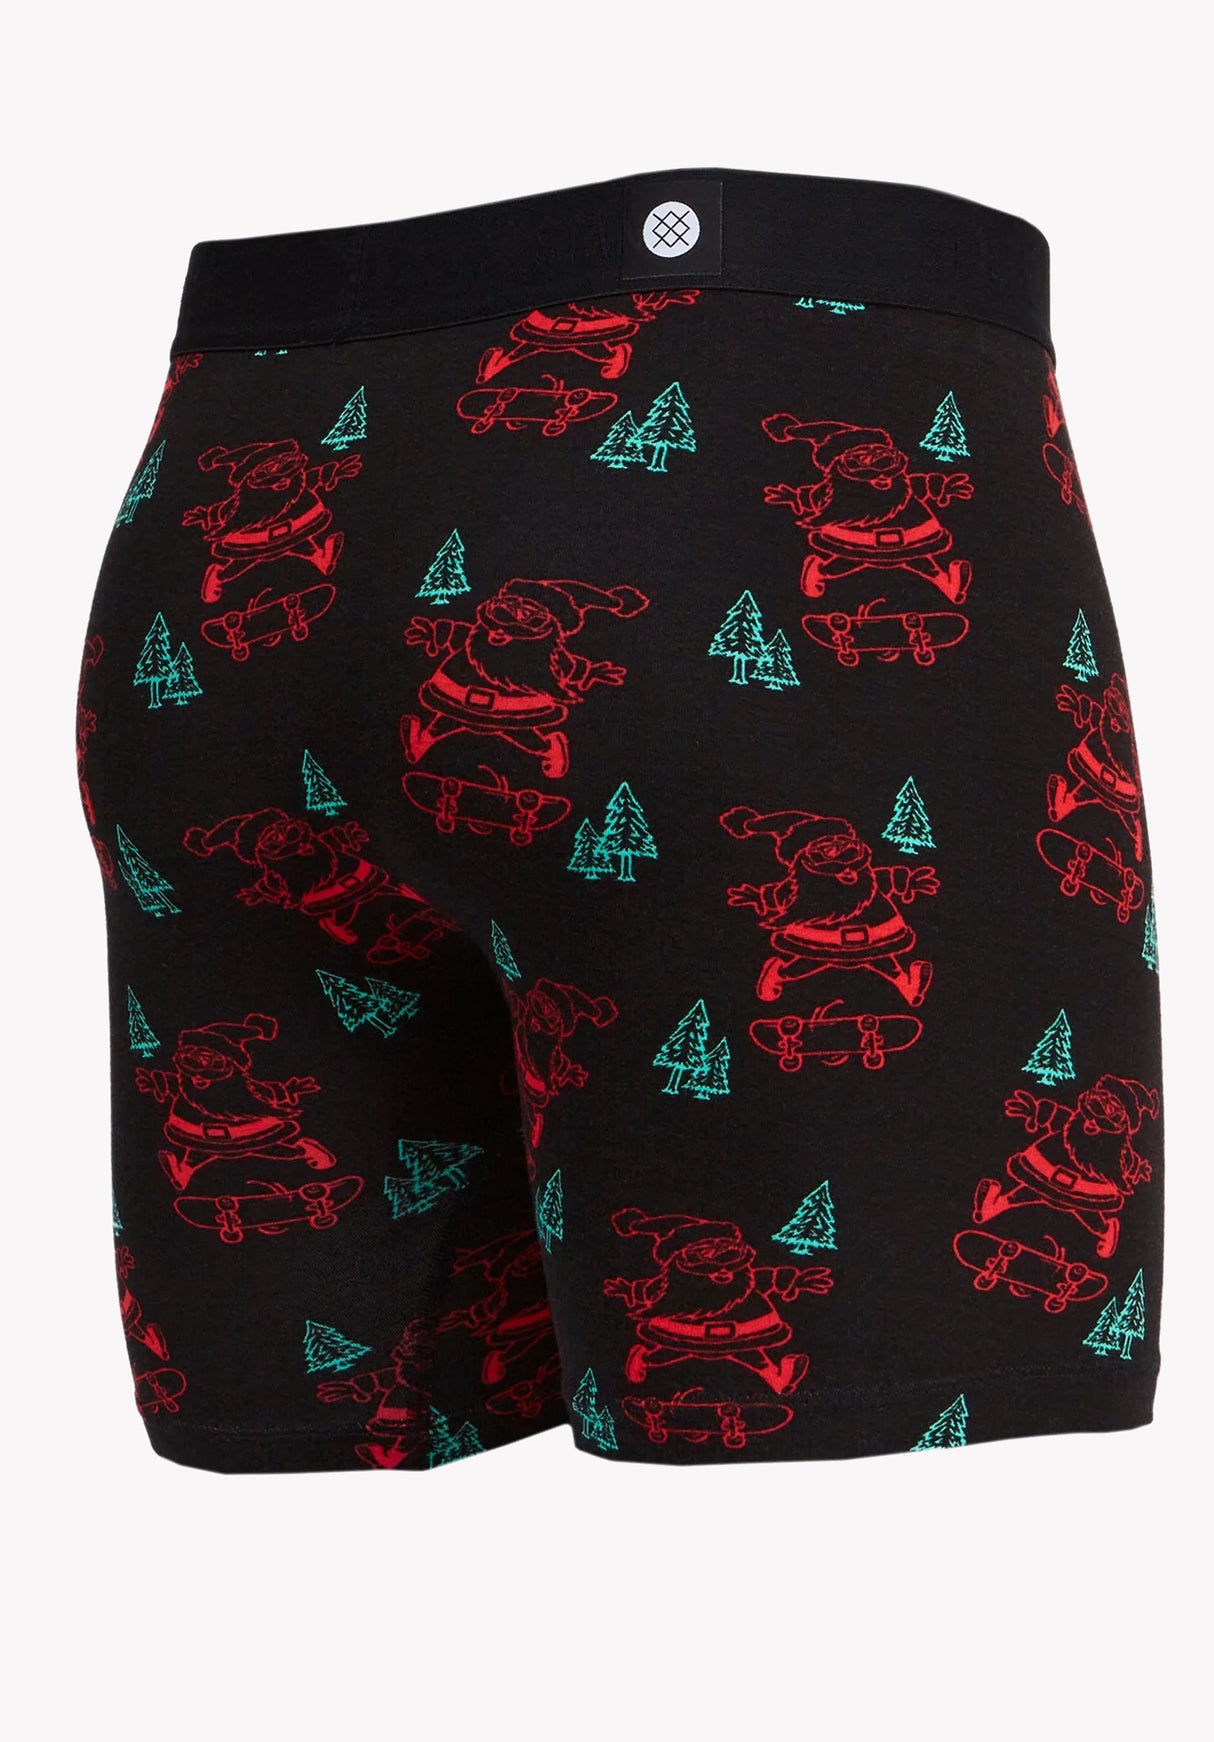 Santa Rips Boxer Brief Wholester Stance Boxershorts in black for